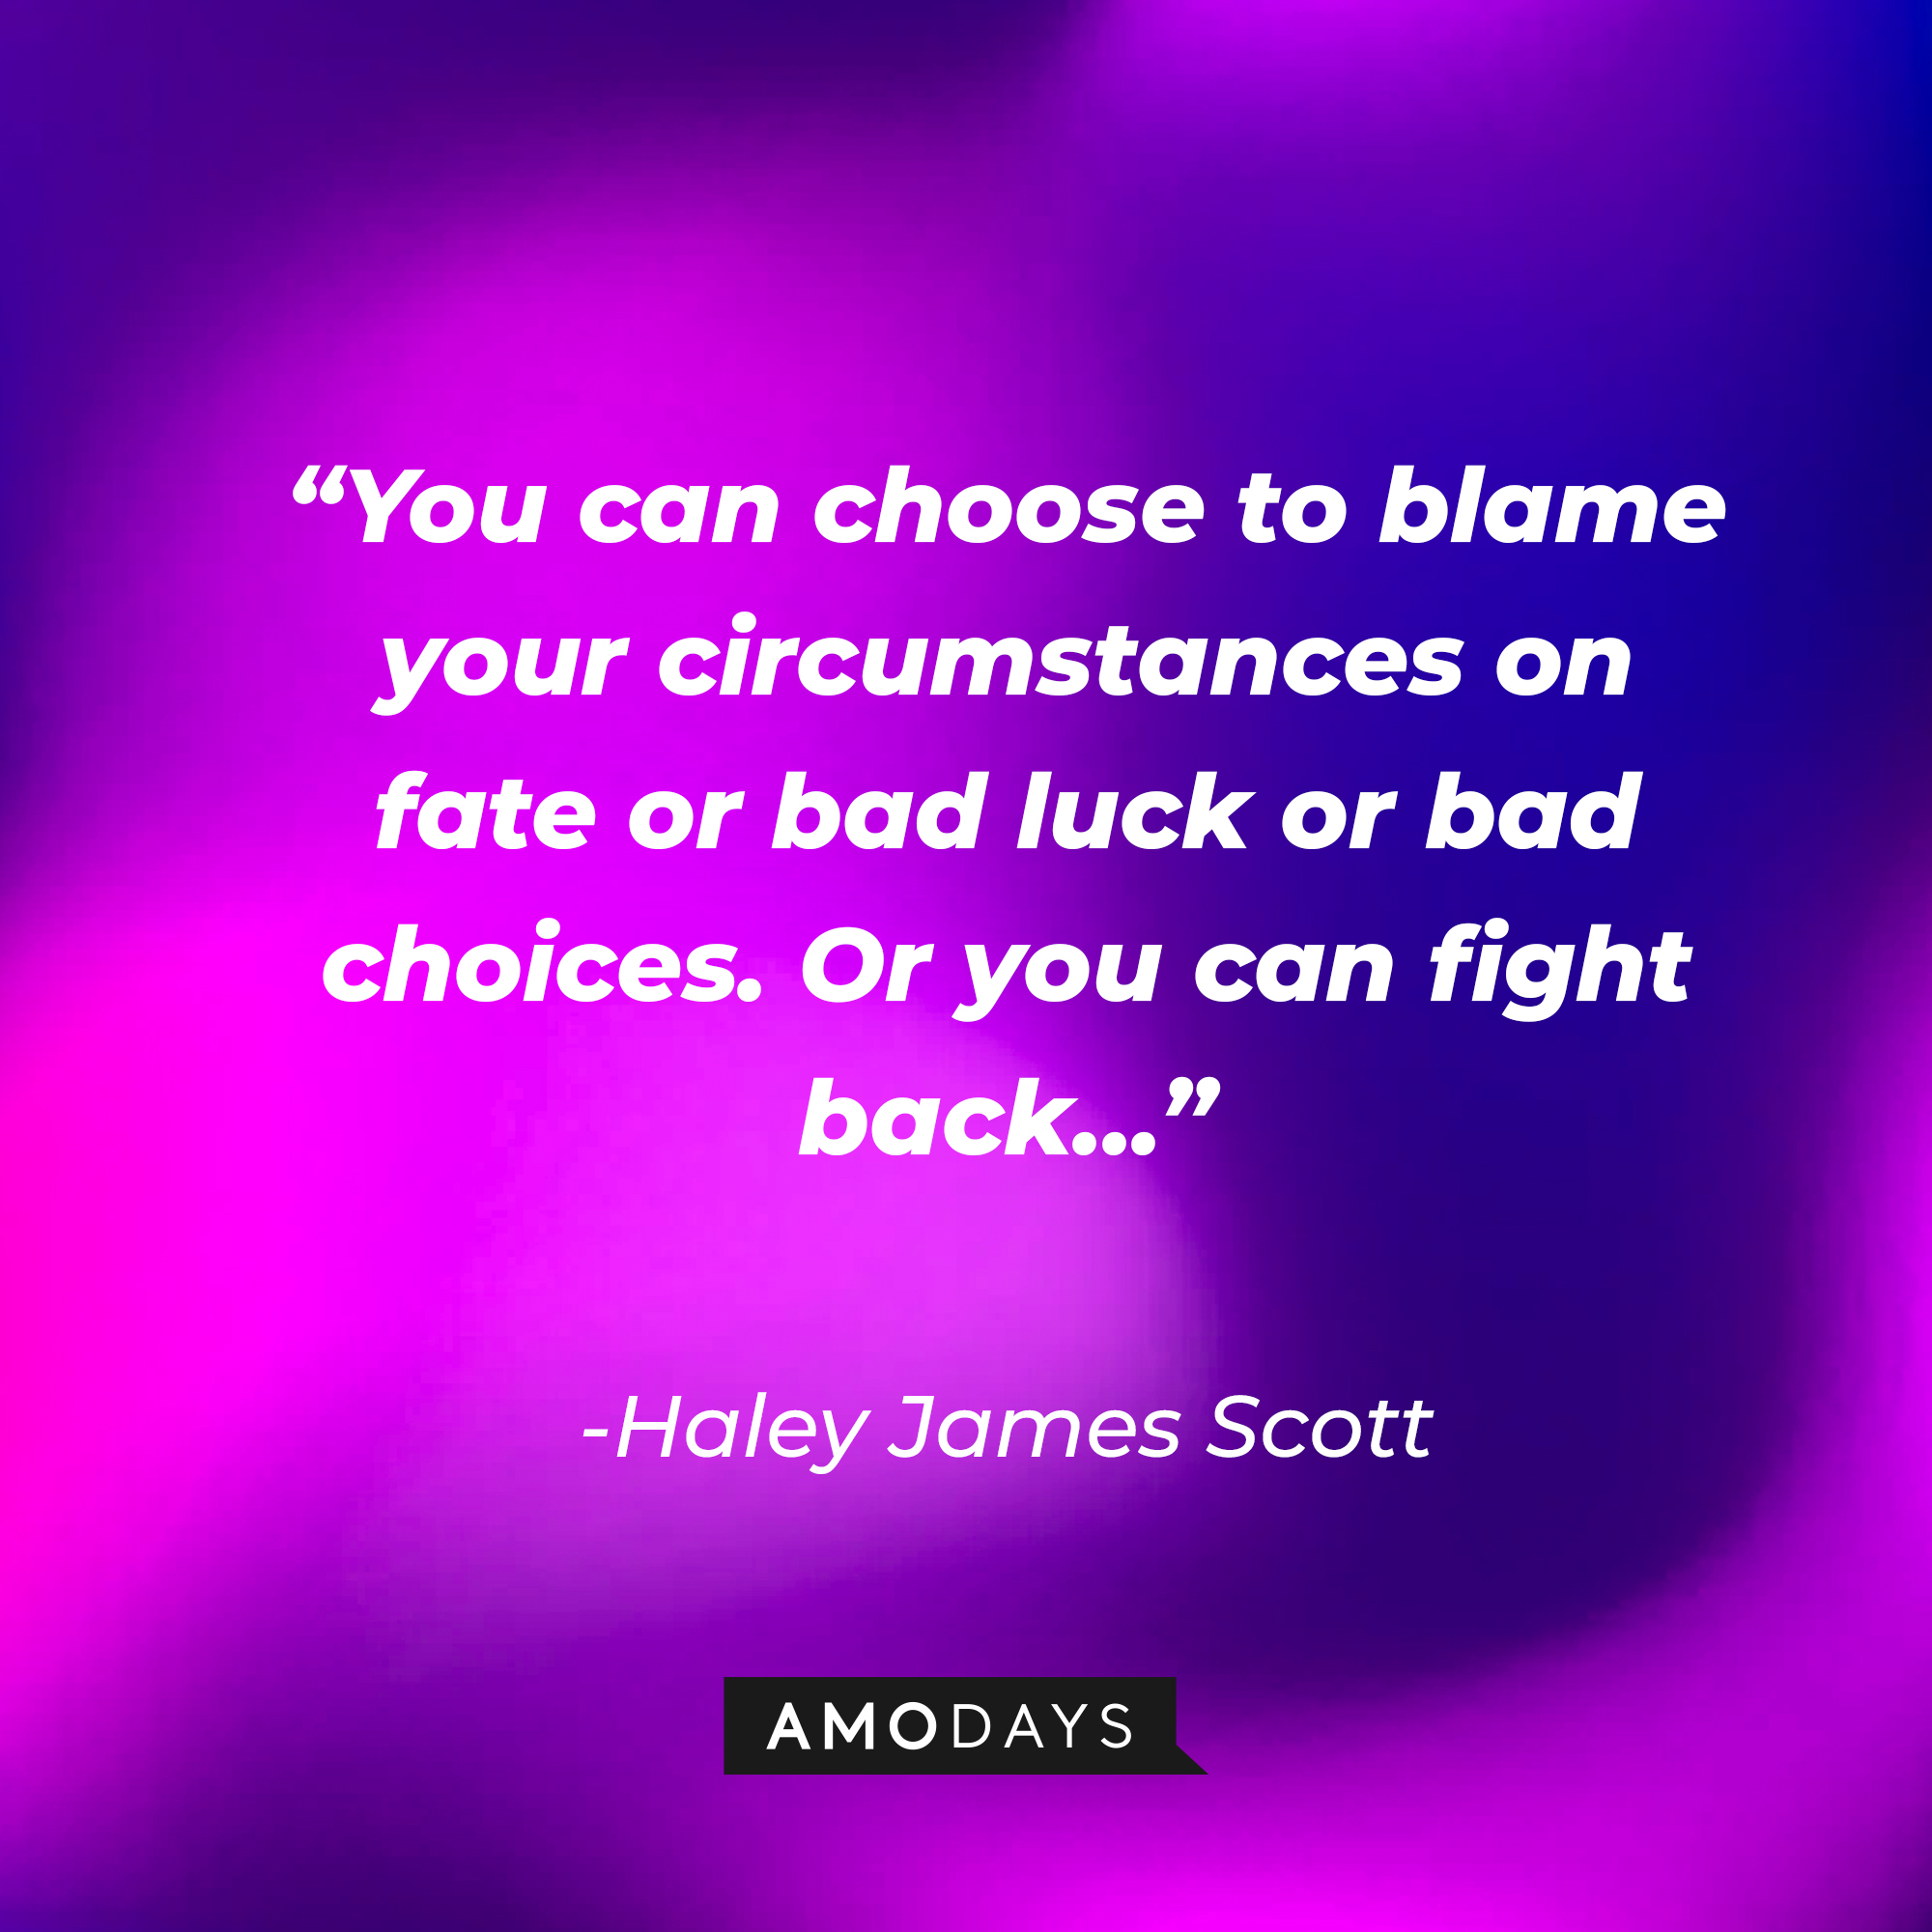 Hayley James Scott quote: “You can choose to blame your circumstances on fate or bad luck or bad choices. Or you can fight back…” | Source: AmoDays